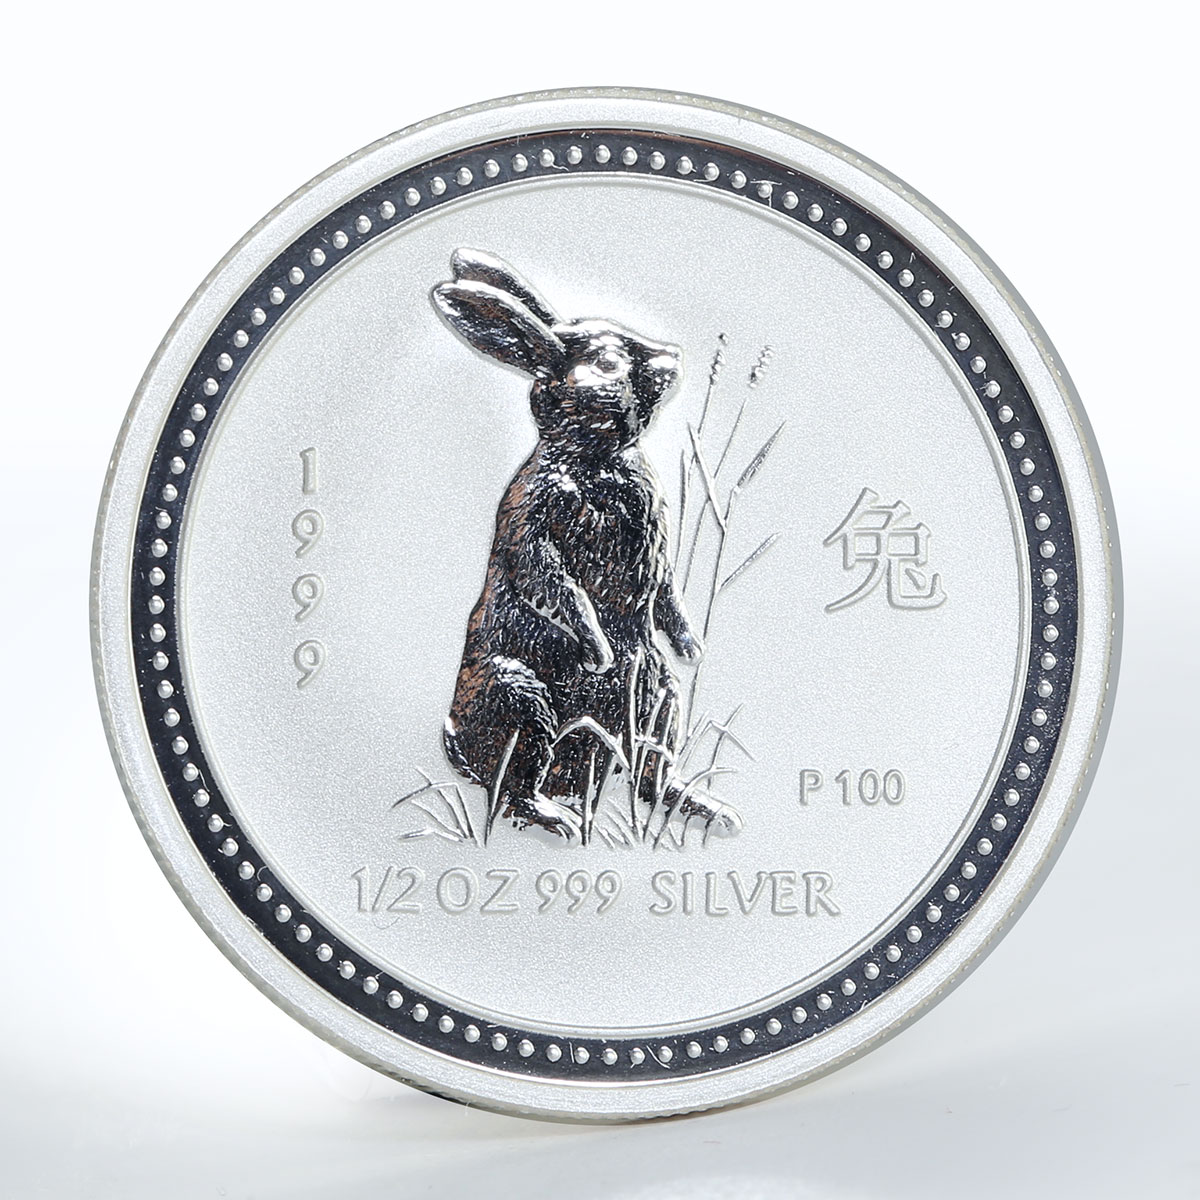 Australia 50 cents Year of the Rabbit Lunar Series I 1/2 oz silver coin 1999